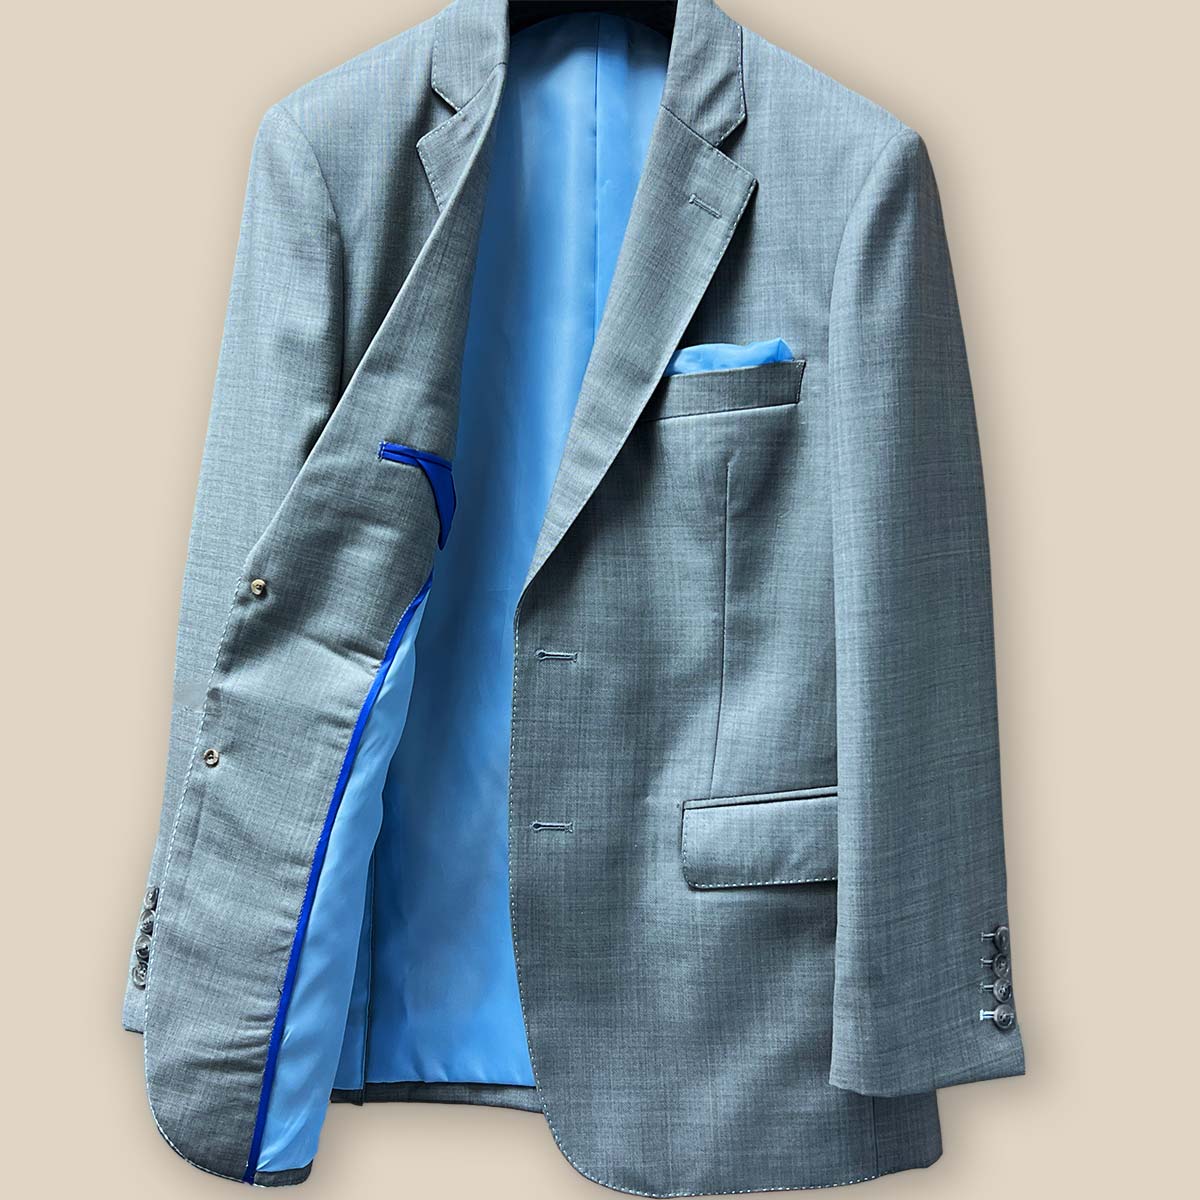 Inside right view of the light grey suit jacket featuring the sky blue bemberg silk lining and royal blue contrast piping.